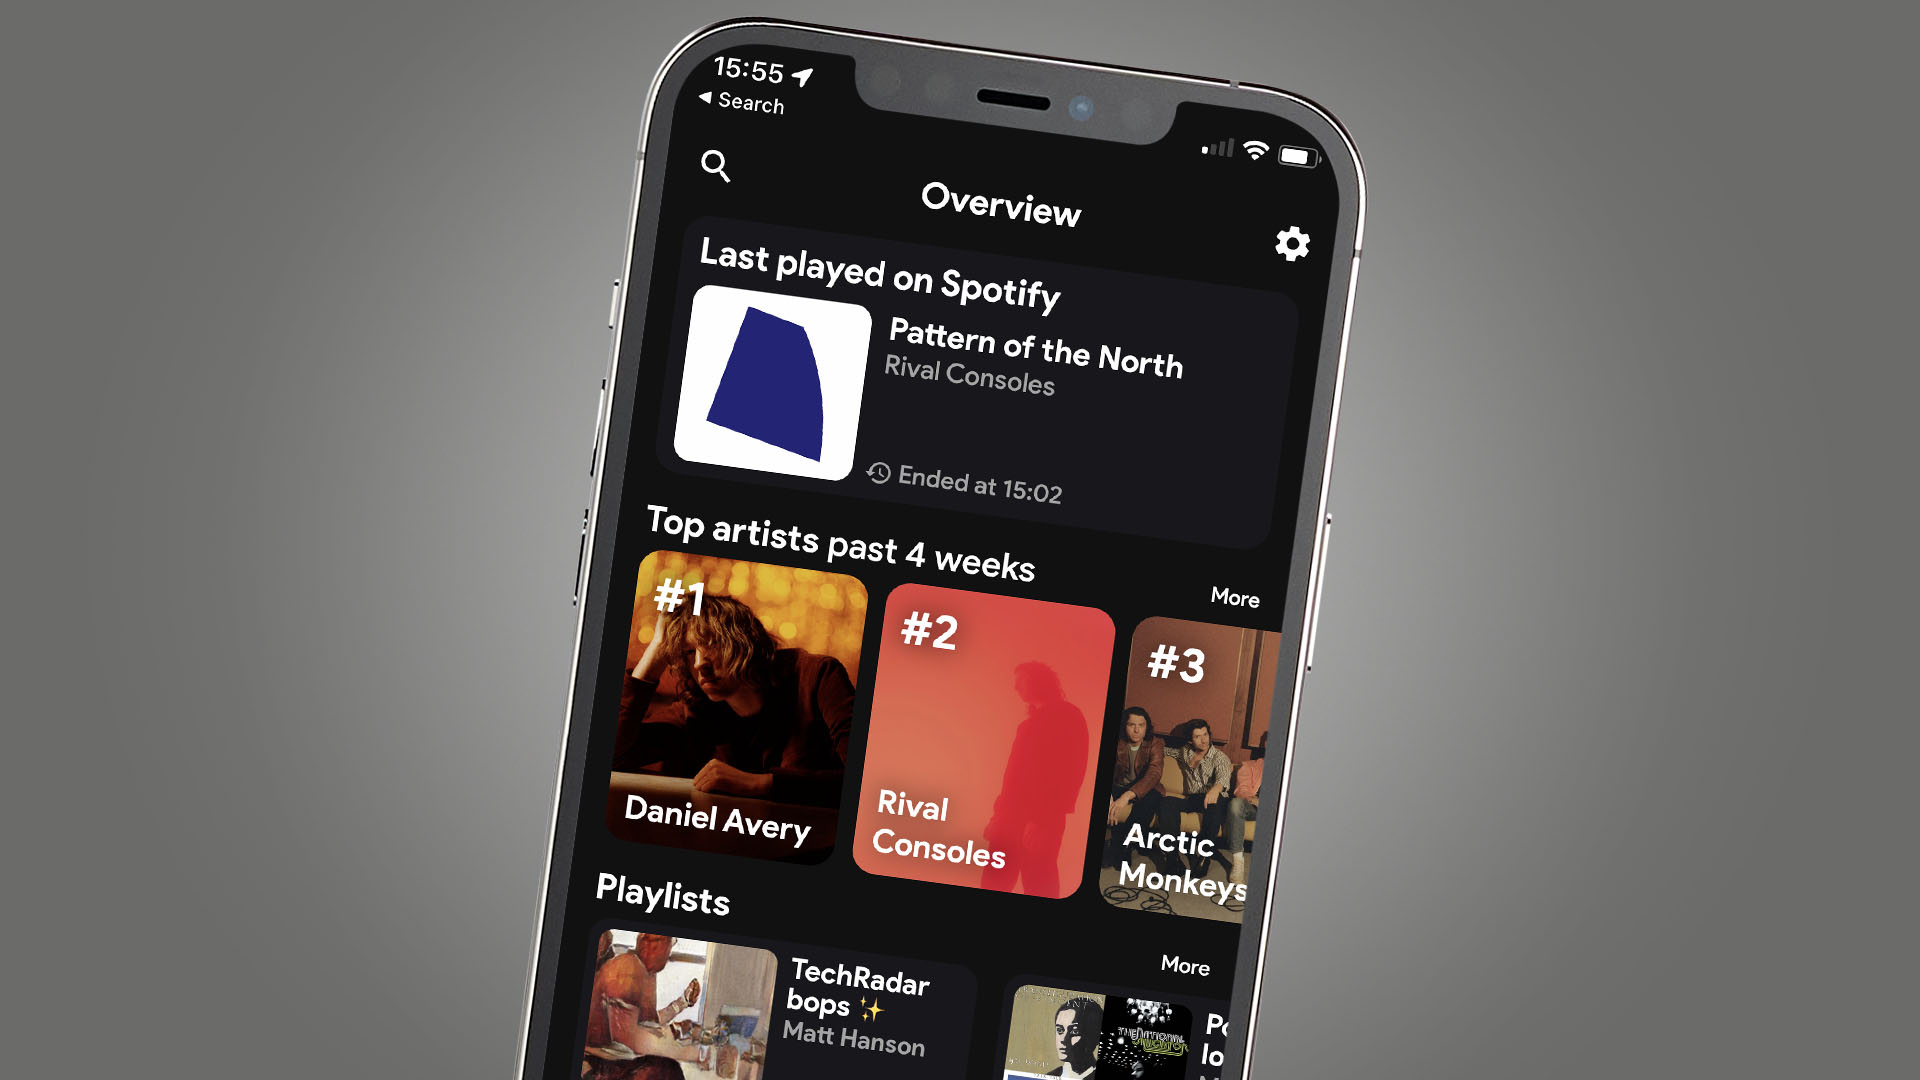 A phone showing the Stats.fm app for Spotify